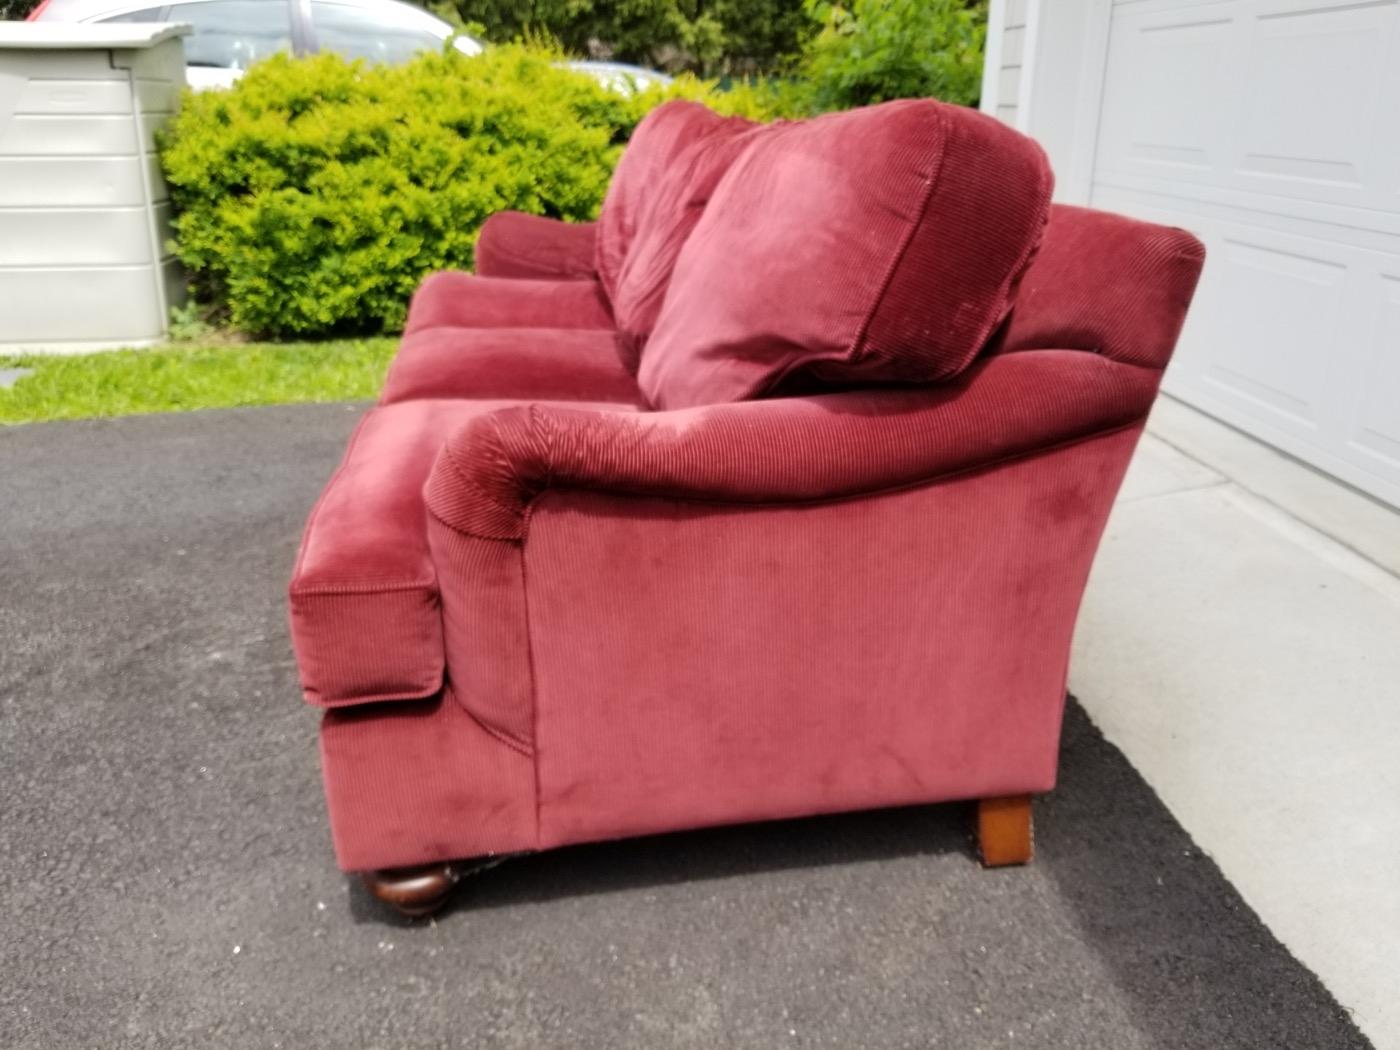 CLEARANCE Henredon custom dark cranberry red corduroy three-seat down-filled sofa. Gorgeous, well-made piece. Original price was over 10,000 USD. Gorgeous shabby-chic, casual lux vibe. Color is deep cranberry like in the main photograph. Outdoor